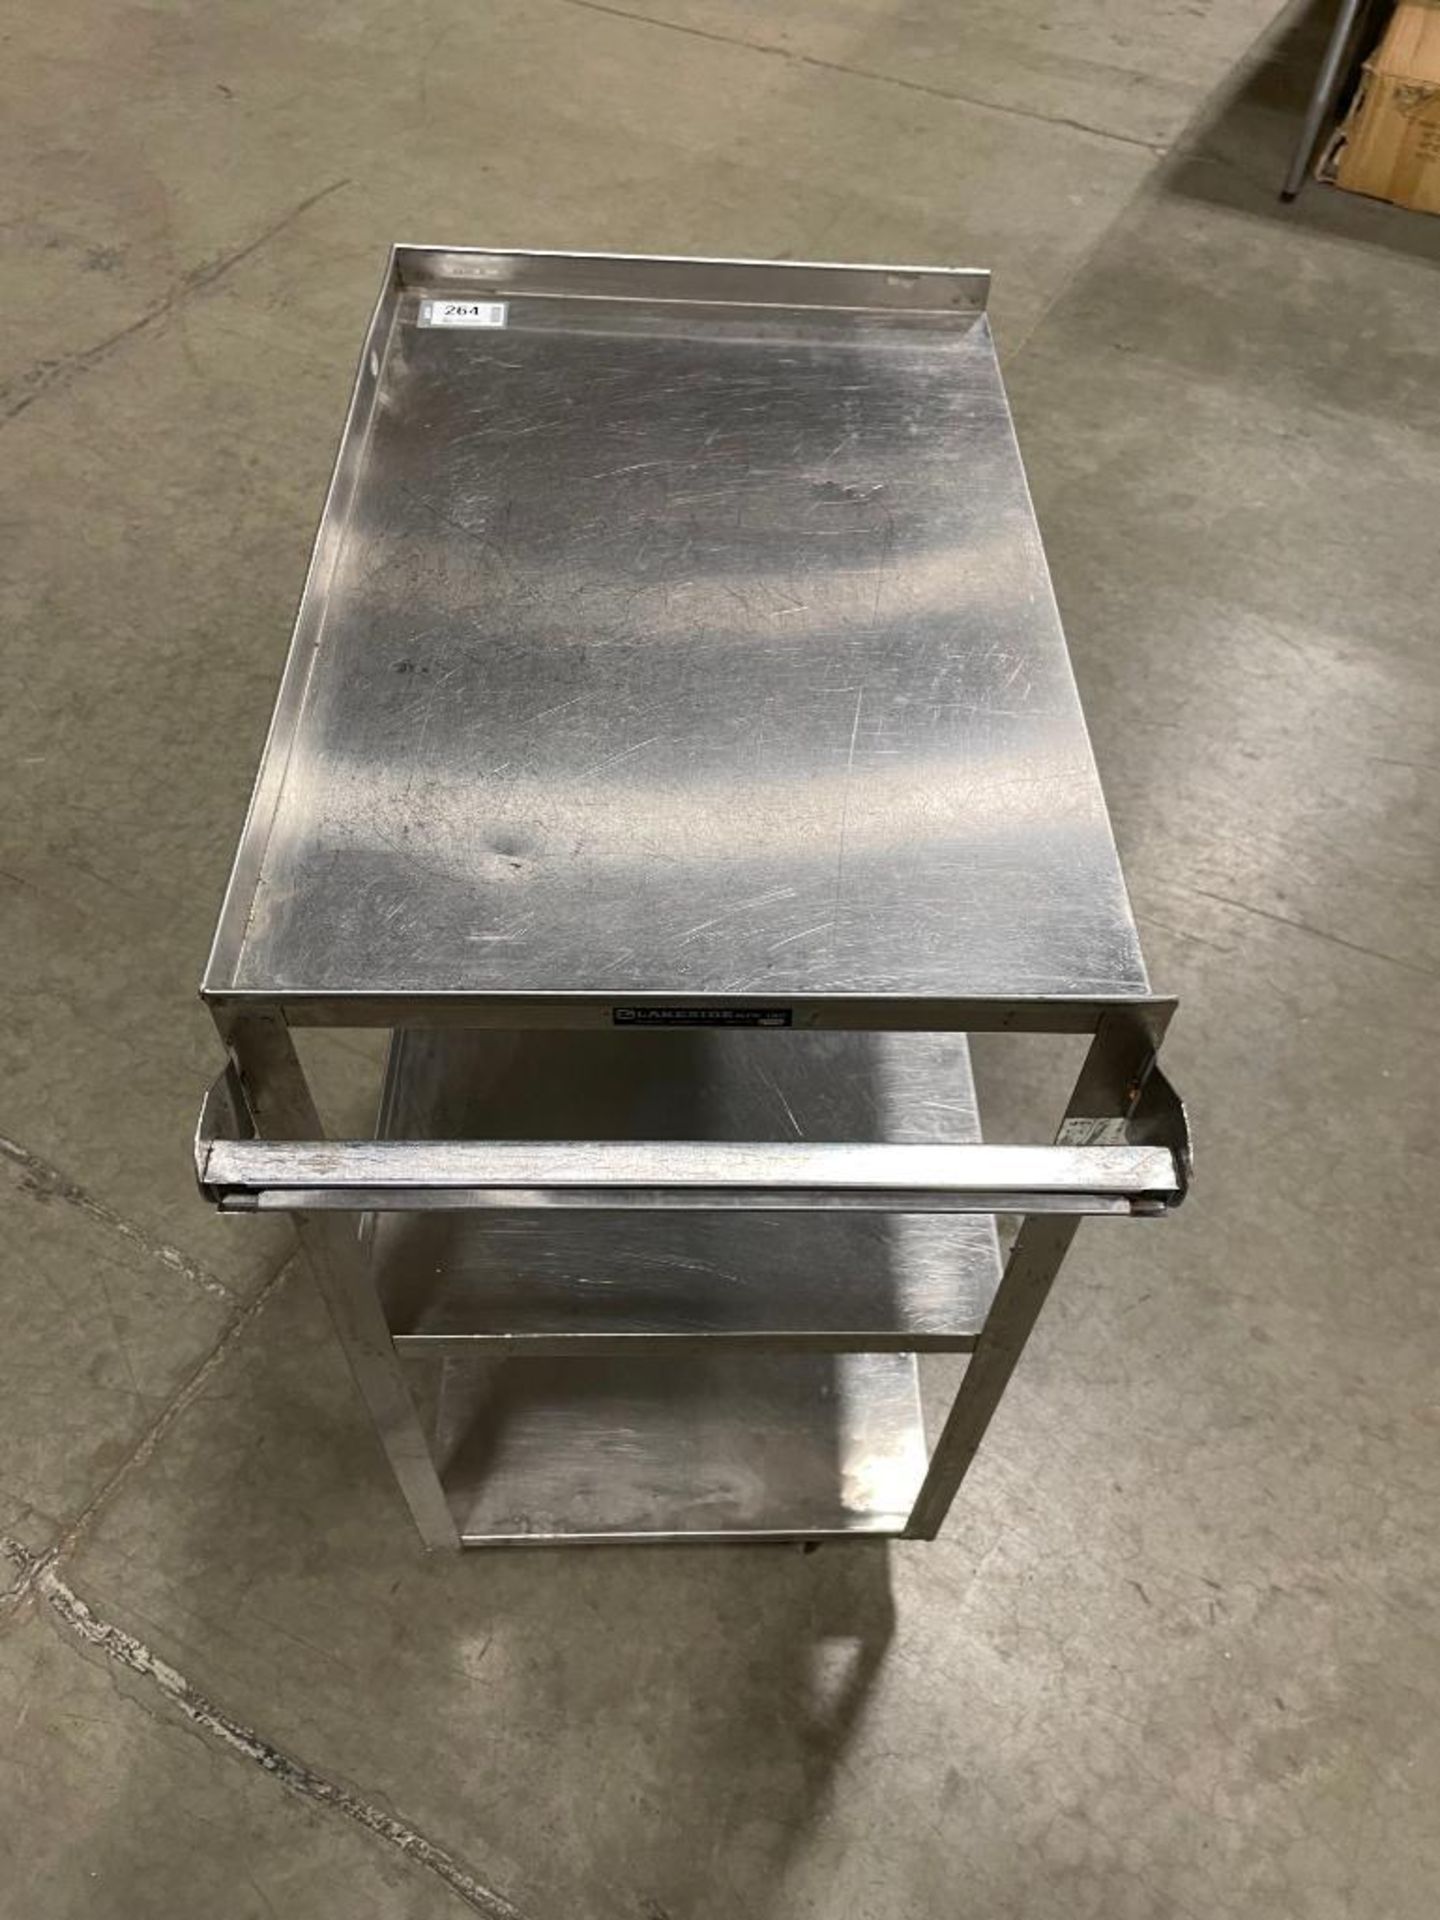 LAKESIDE 411 STAINLESS STEEL UTILITY CART 15" X 24" - 500 LB CAPACITY - Image 2 of 6